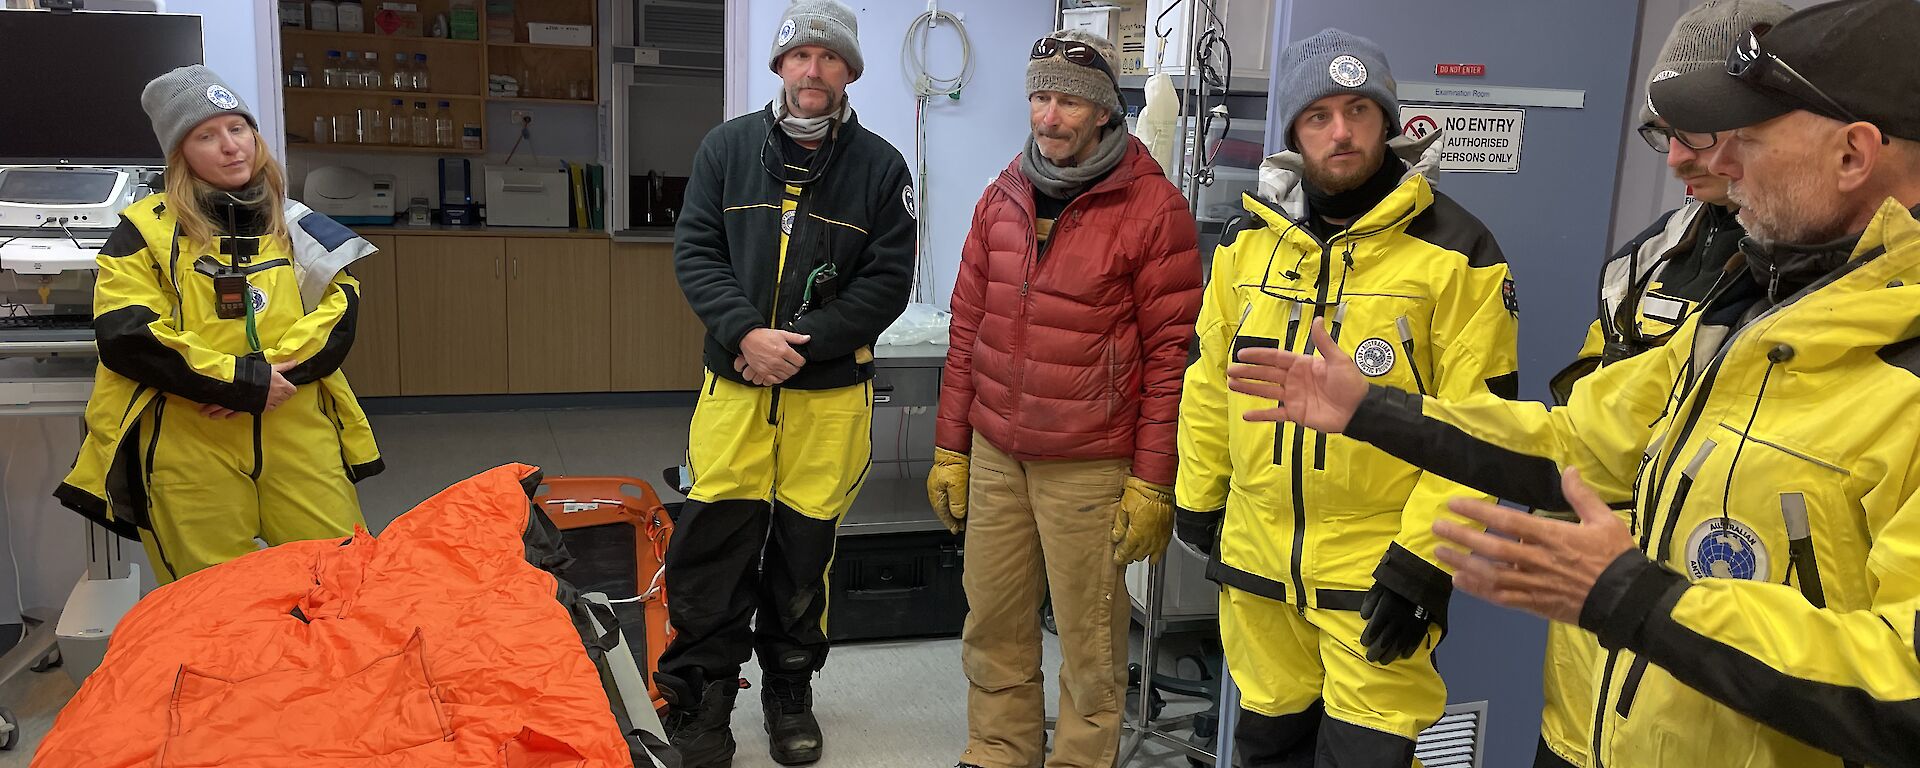 A group of expeditioners standing in the medical facility